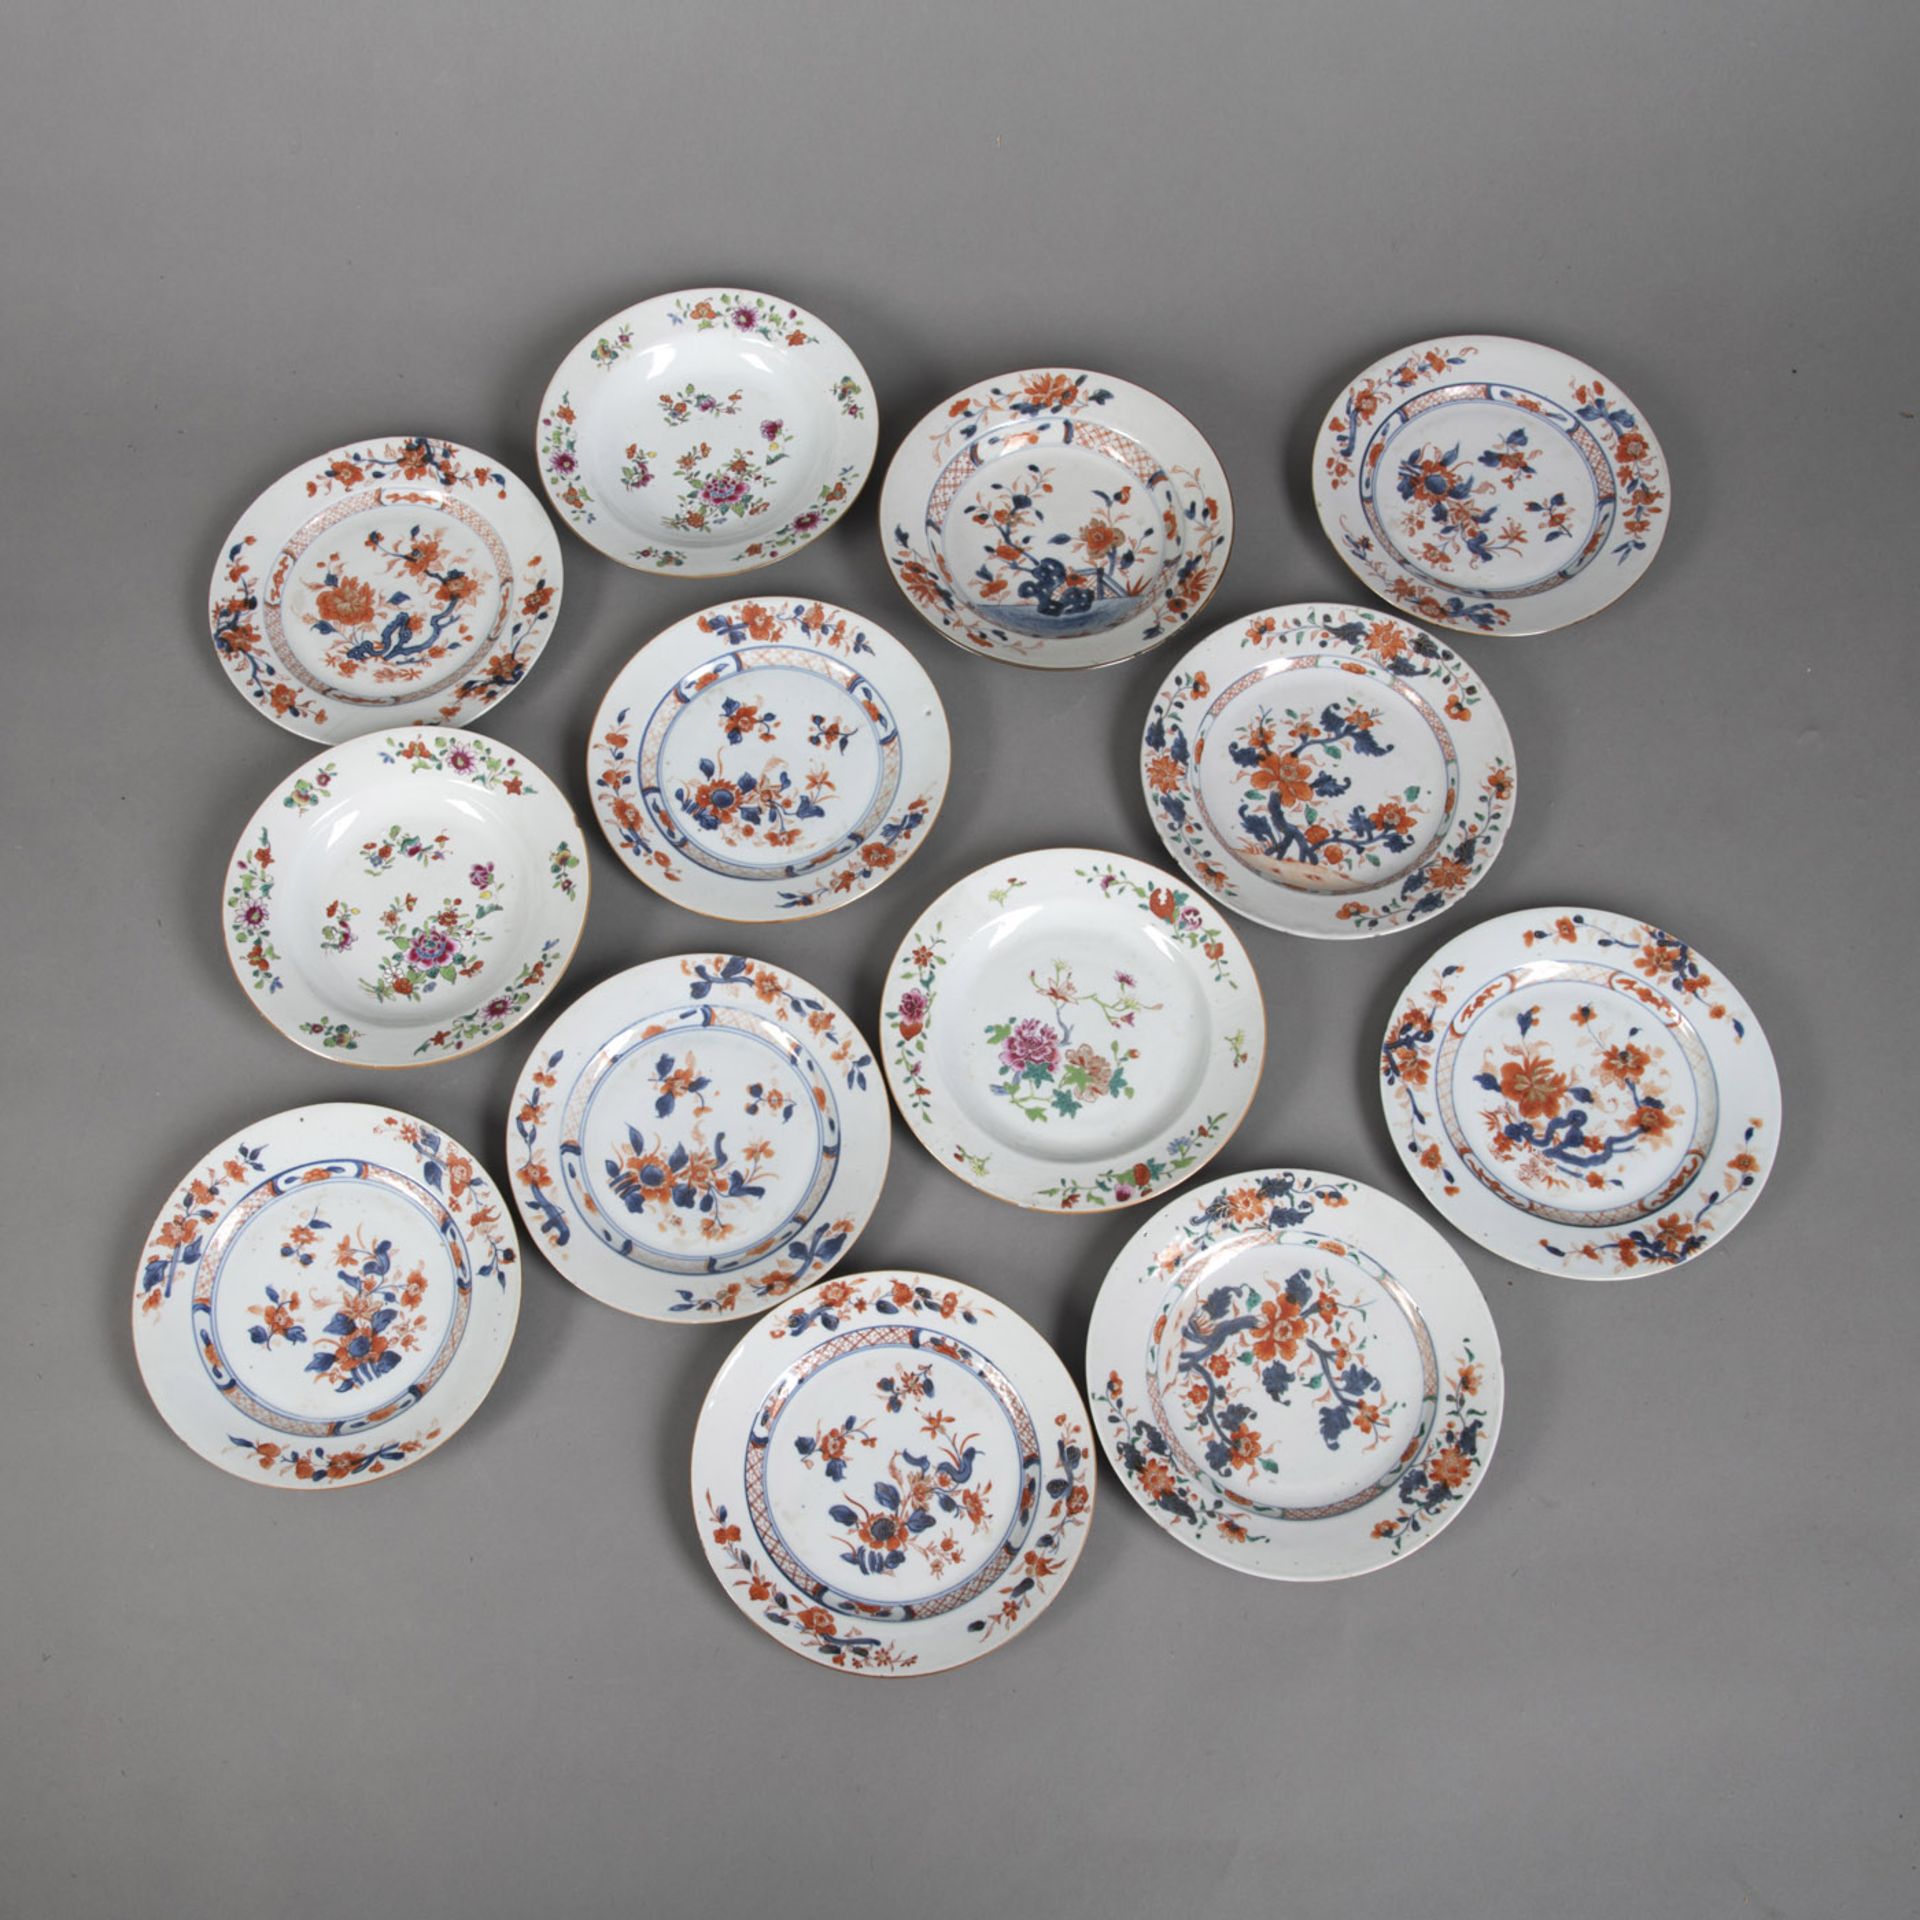 13 EXPORT PORCELAIN PLATES PAINTED IN 'FAMILLE ROSE' AND UNDERGLAZE BLUE, PARTLY WITH GOLD, WITH FL